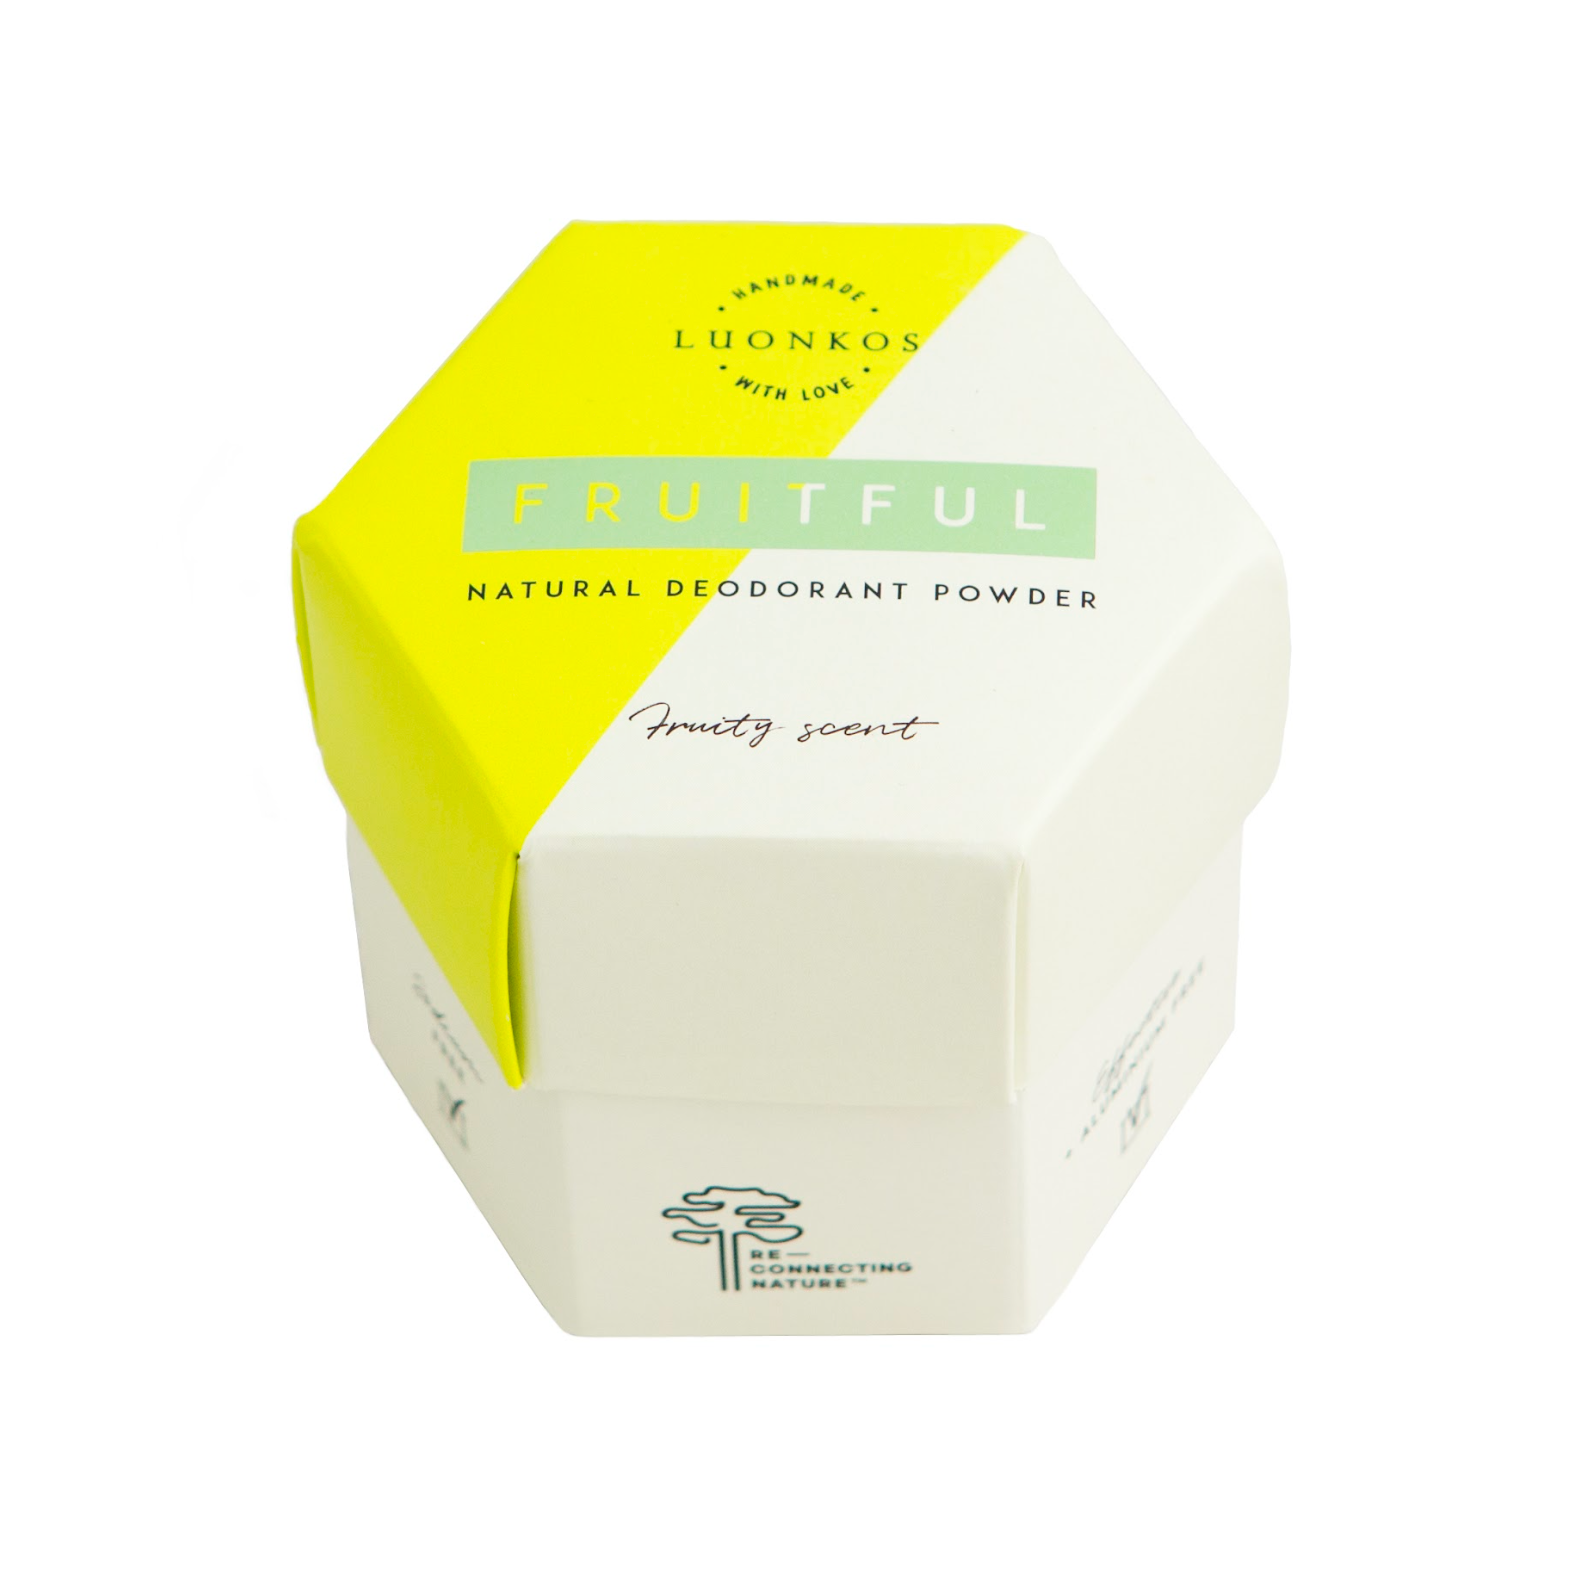 Fruitful Powder Deodorant - Fruity Scent, Forest Microbes